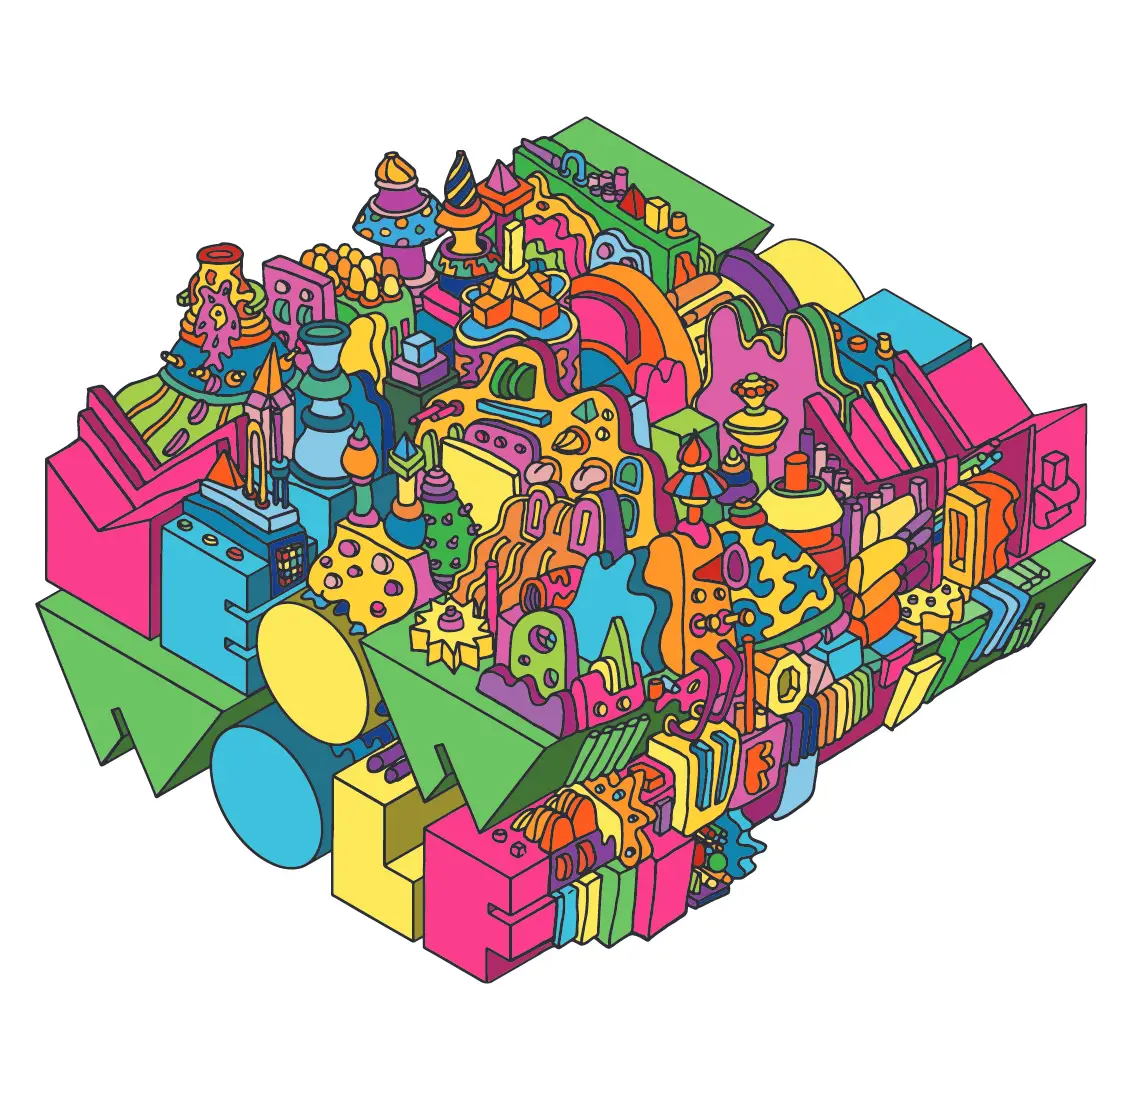 Courtesy artwork: One of Dorman’s most recognizable designs for Meow Wolf.